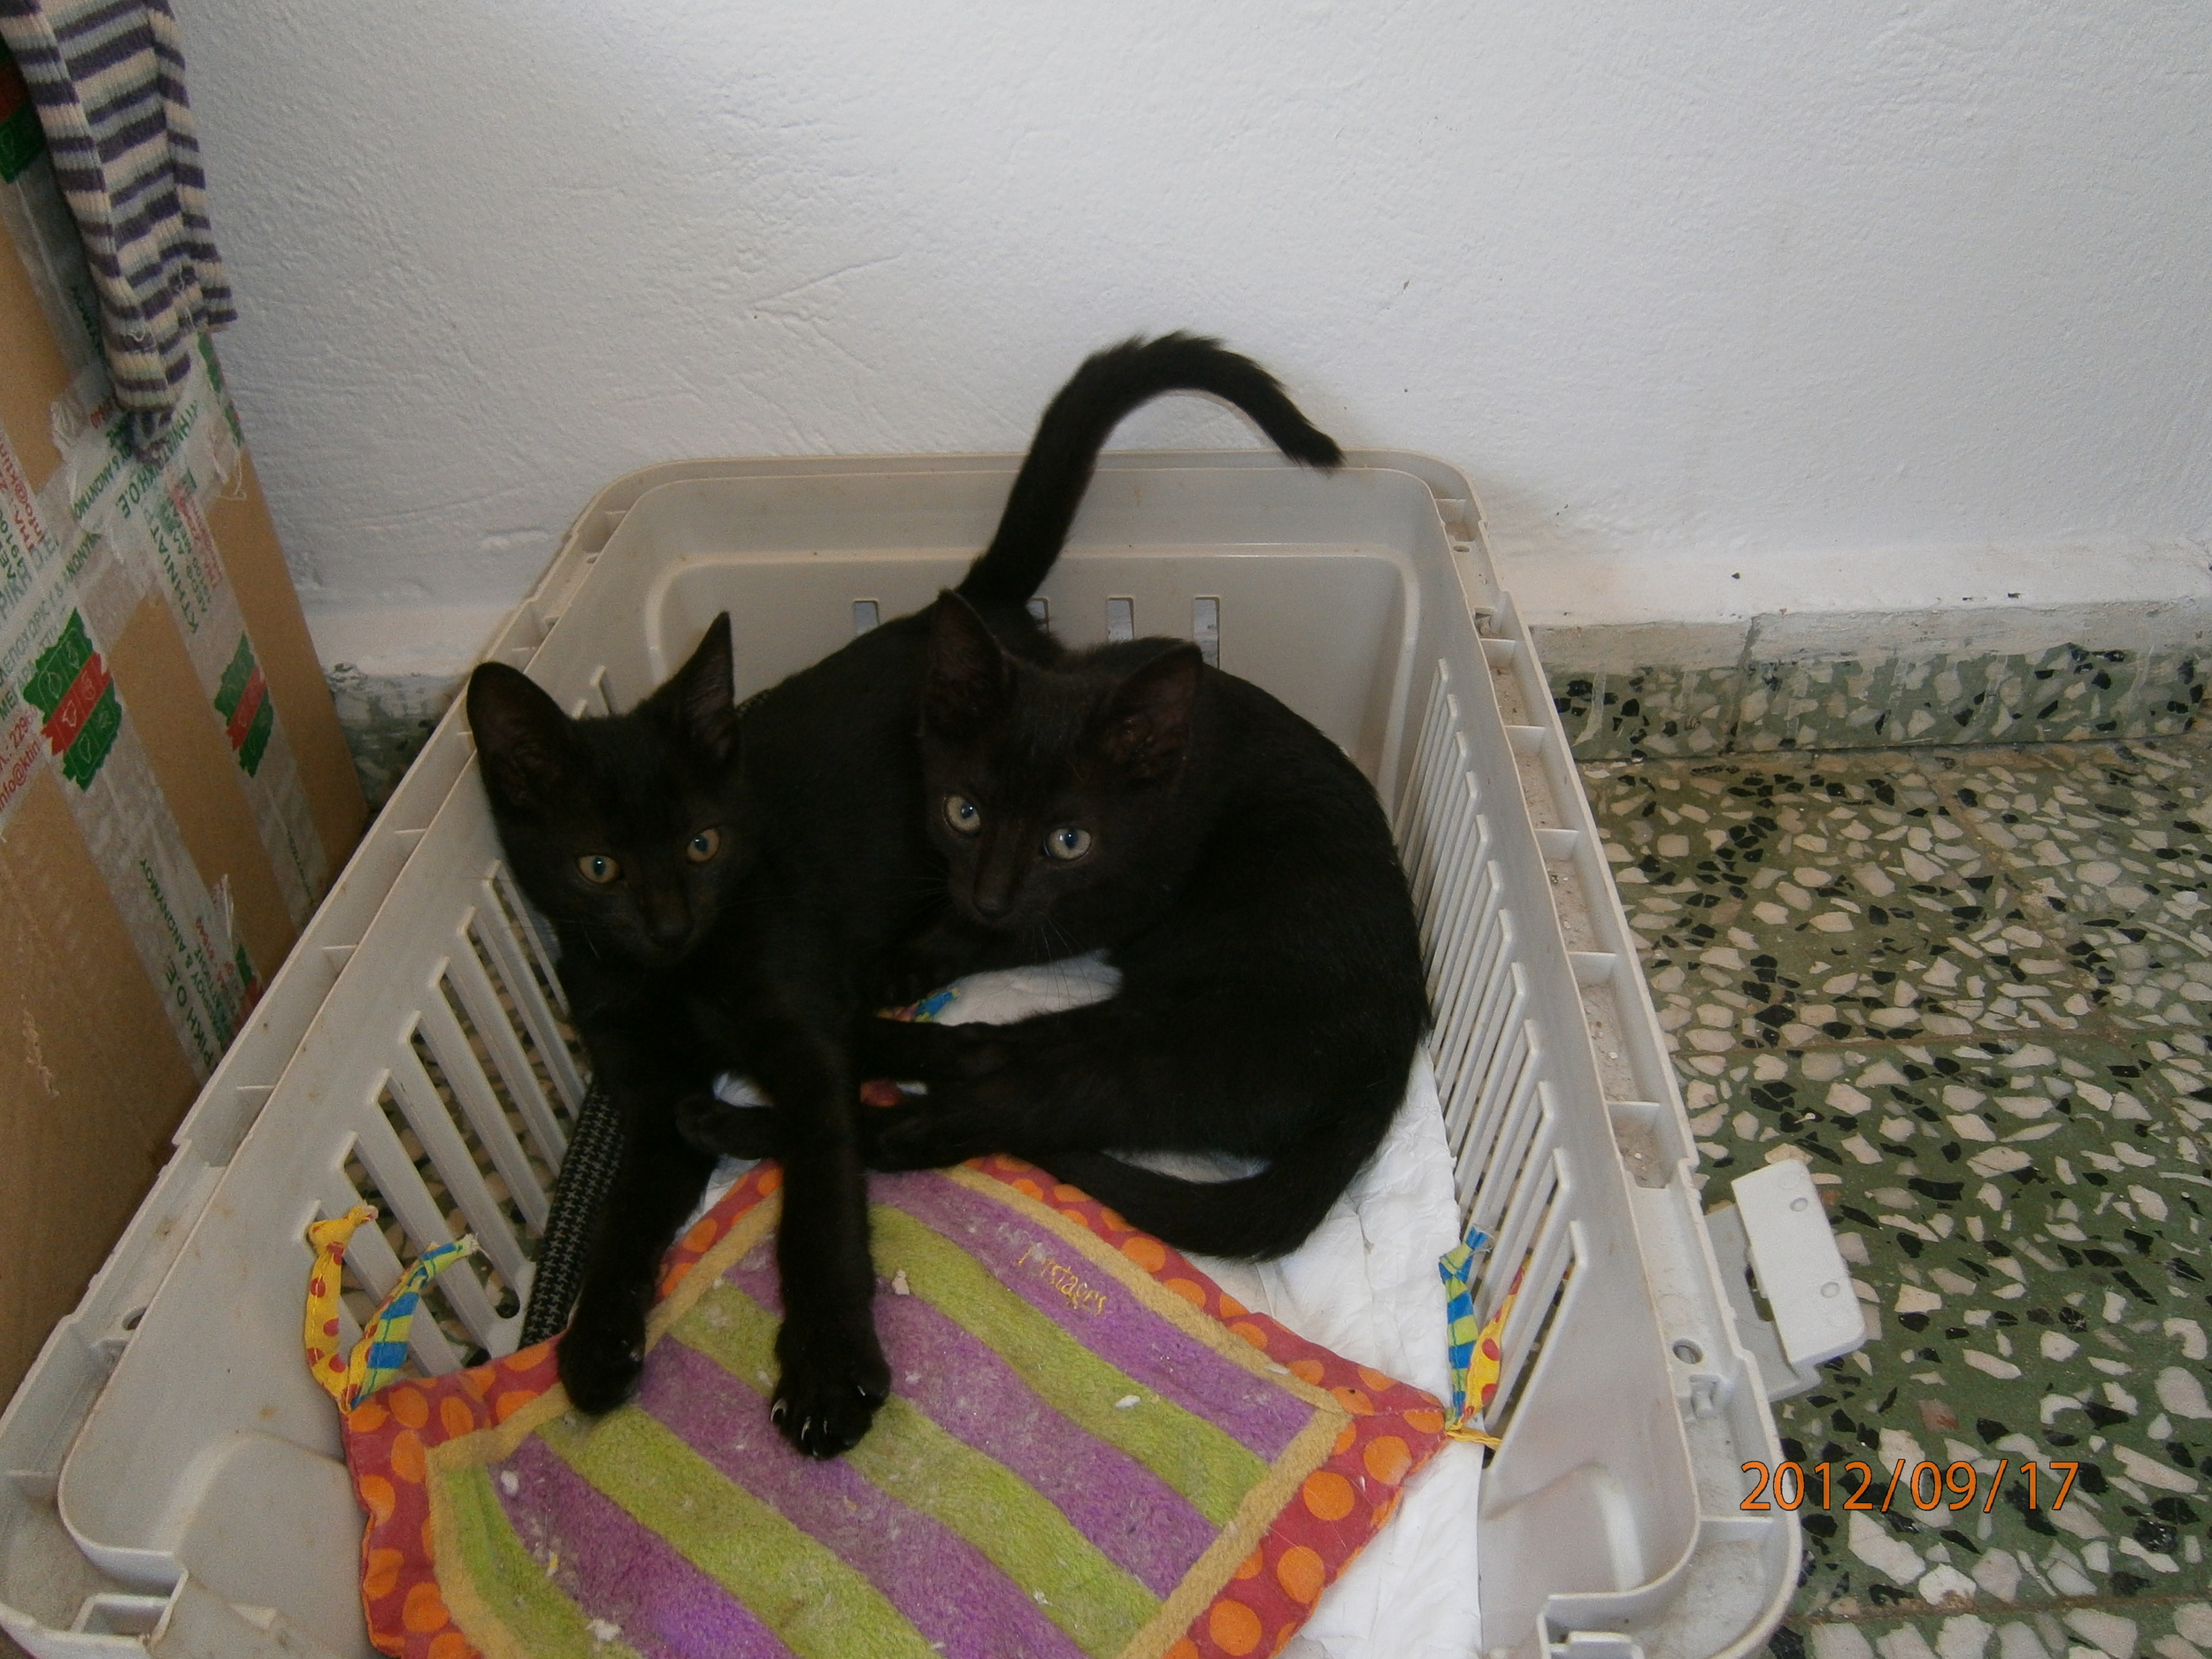 With his sister Daisy as kittens